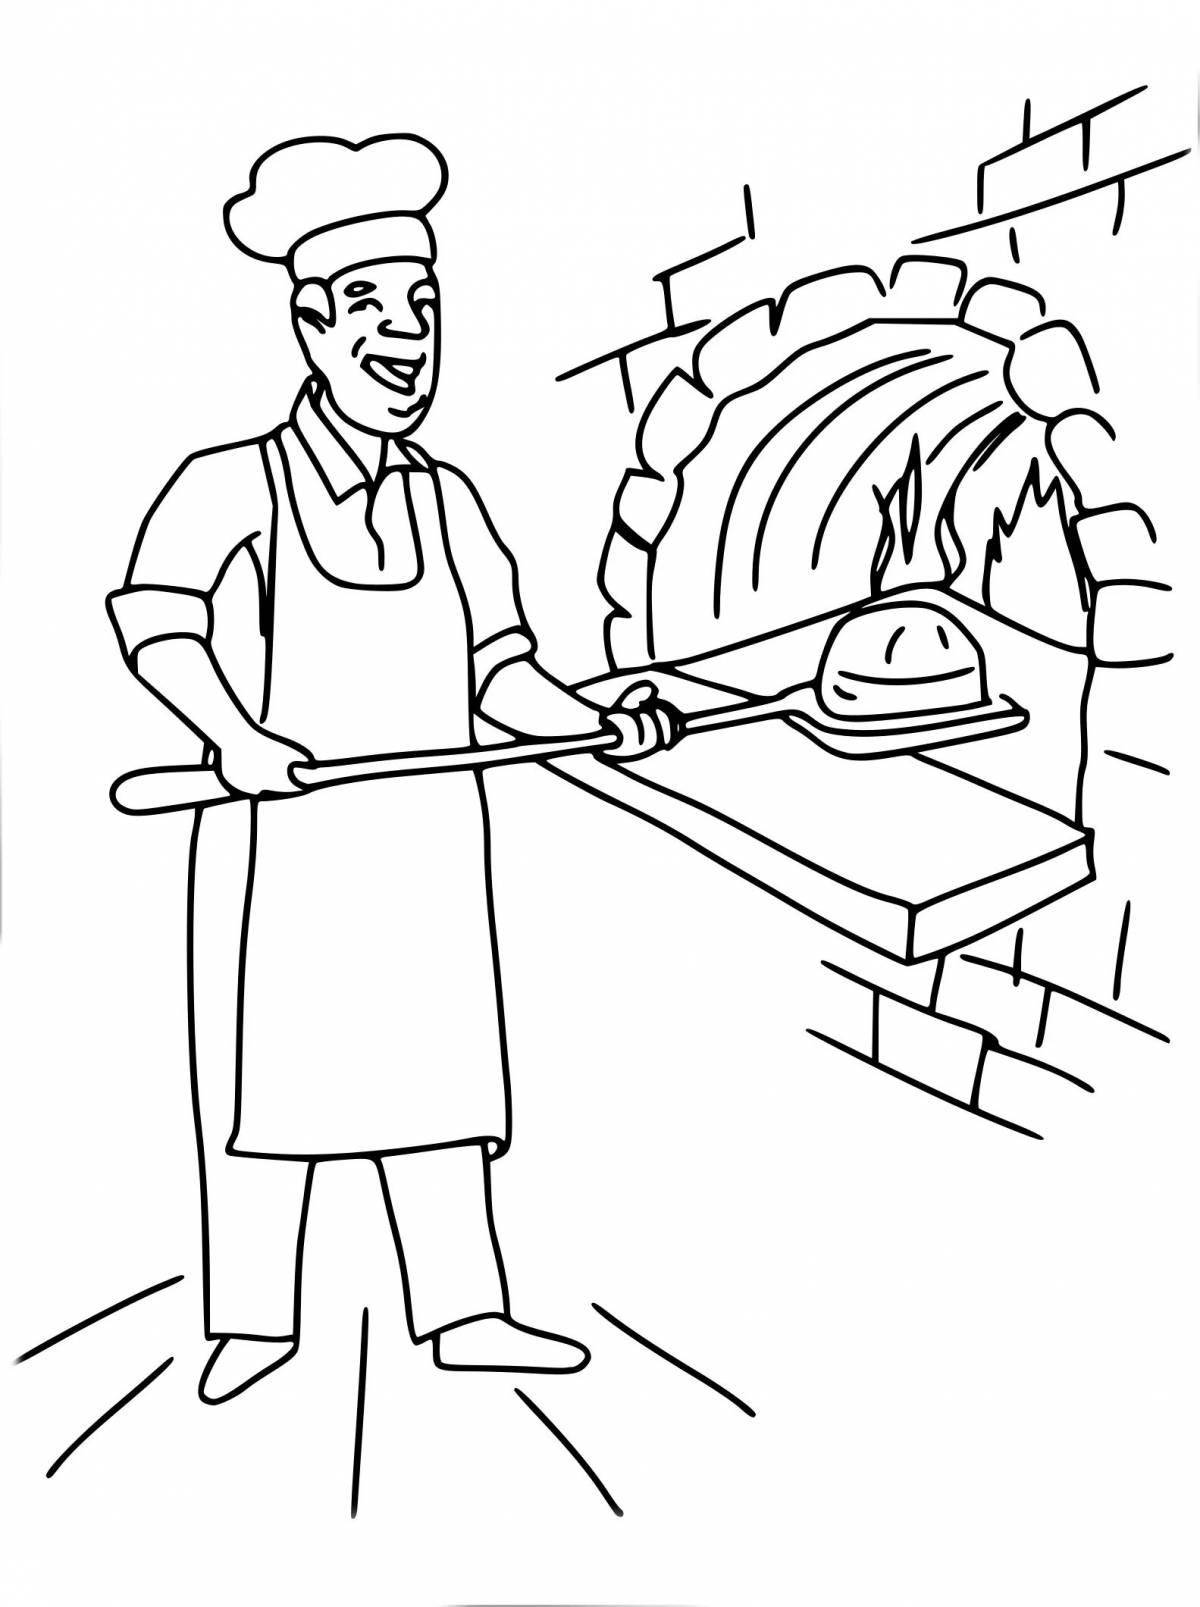 Cute 1st grade job coloring pages